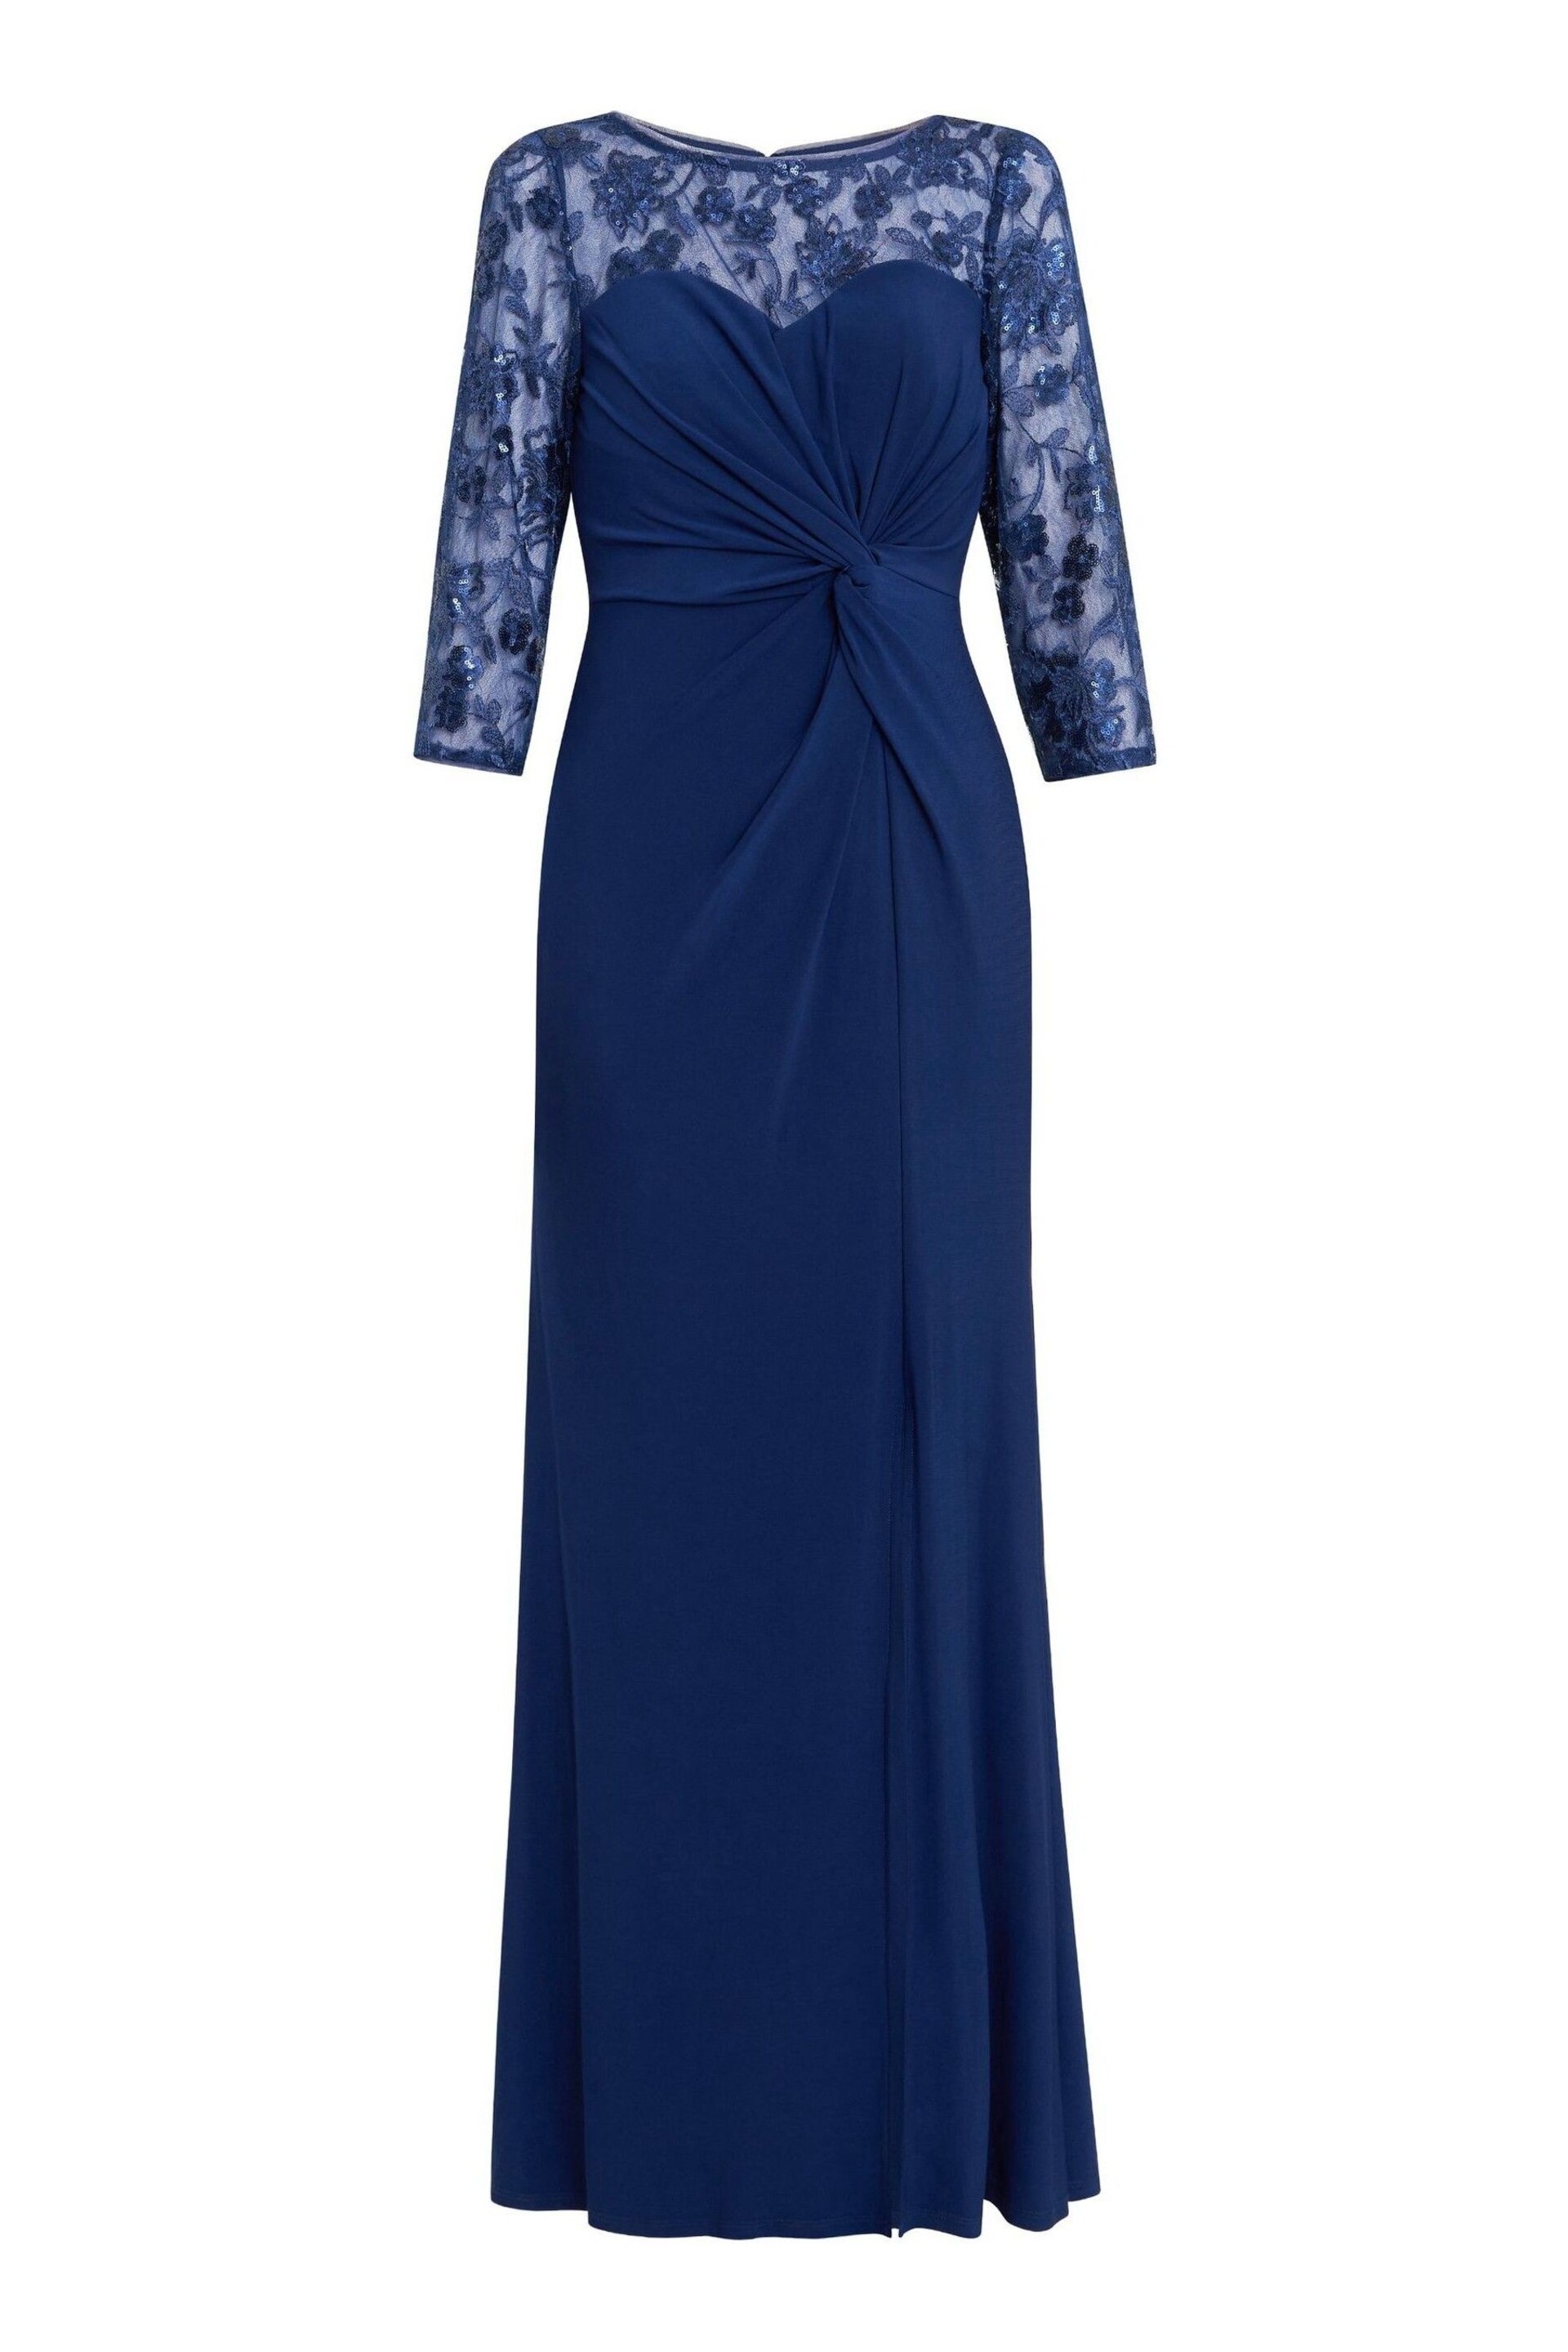 Gina Bacconi Blue Sonia Maxi Knot Front Sweetheart Dress - Image 5 of 5